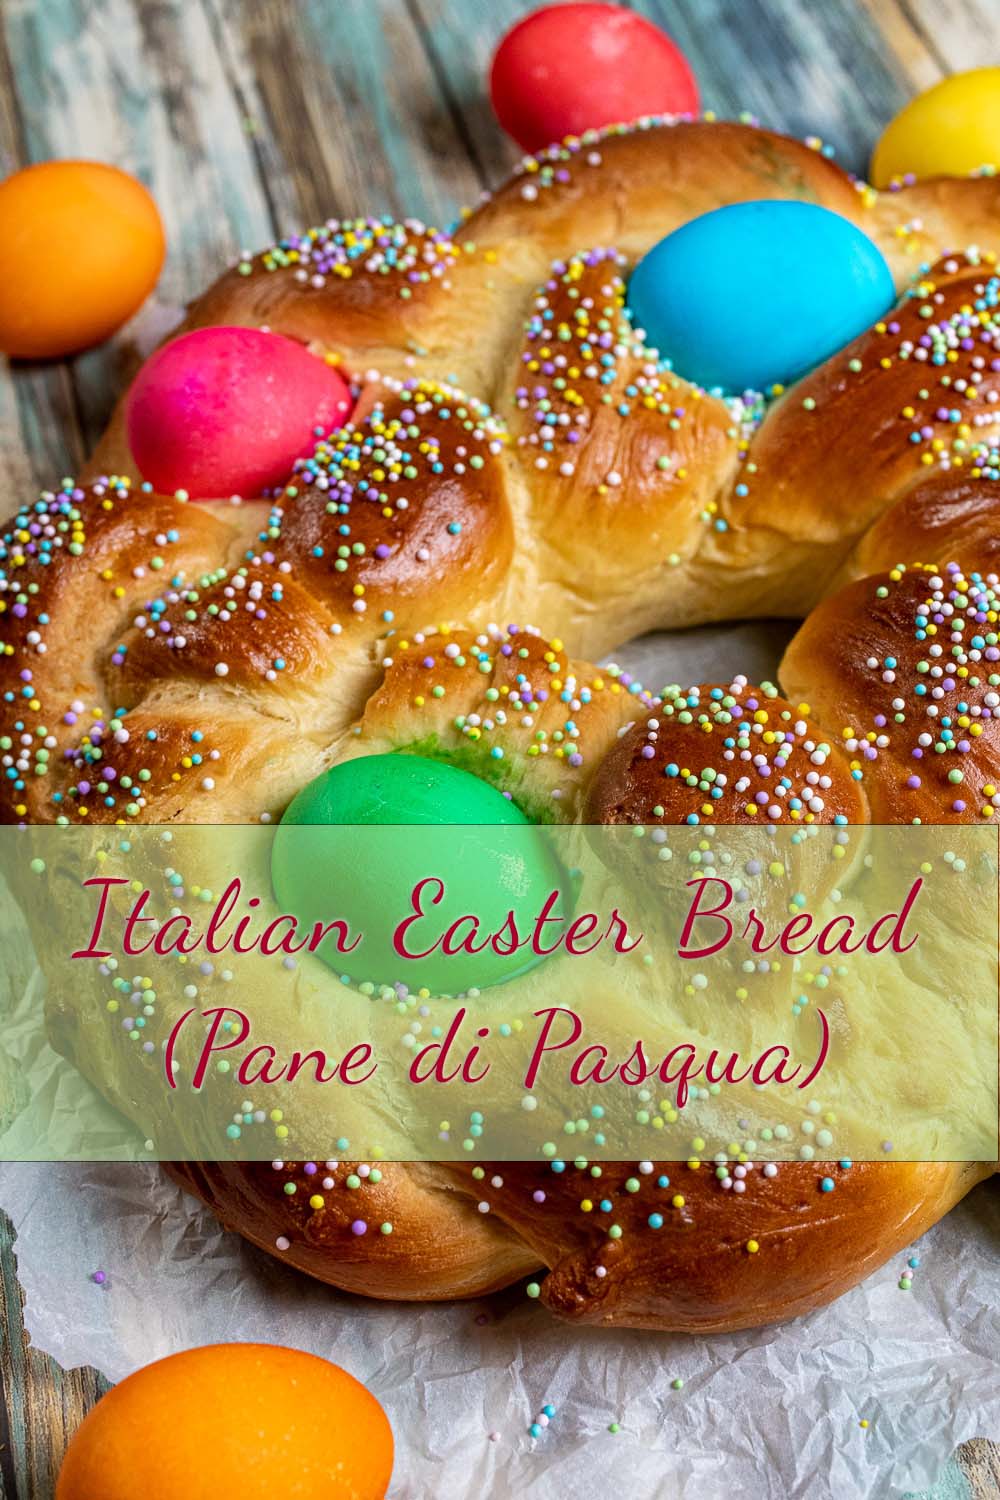 close up view of braided Italian Easter bread with dyed eggs and sprinkles